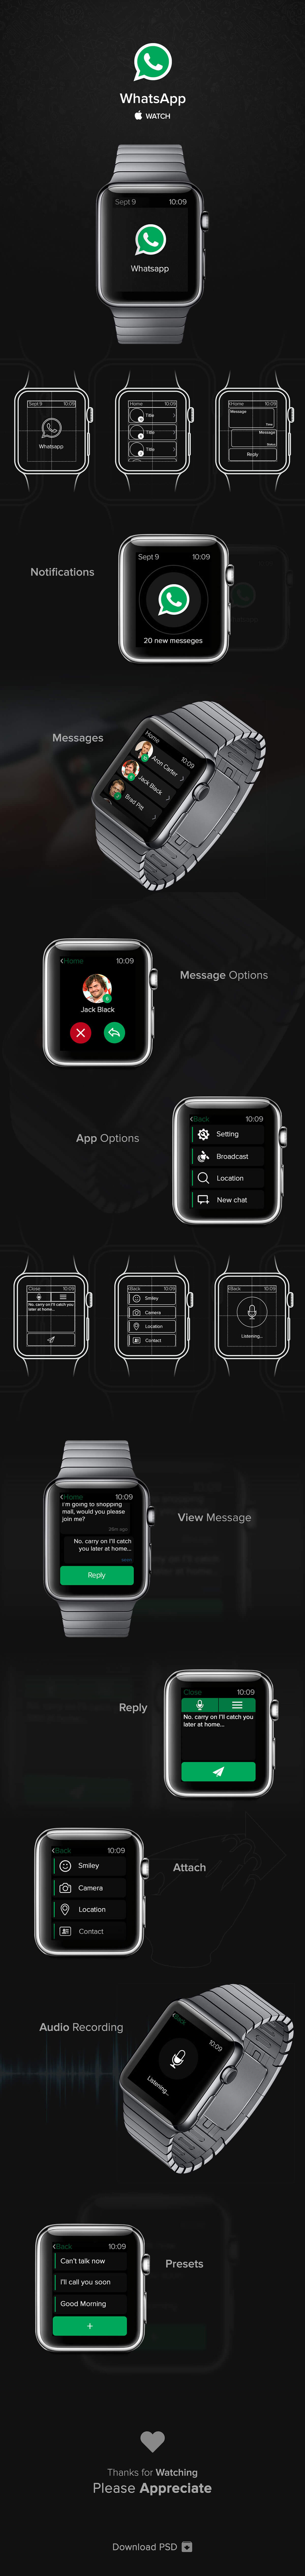 Apple Watch Free PSD Download